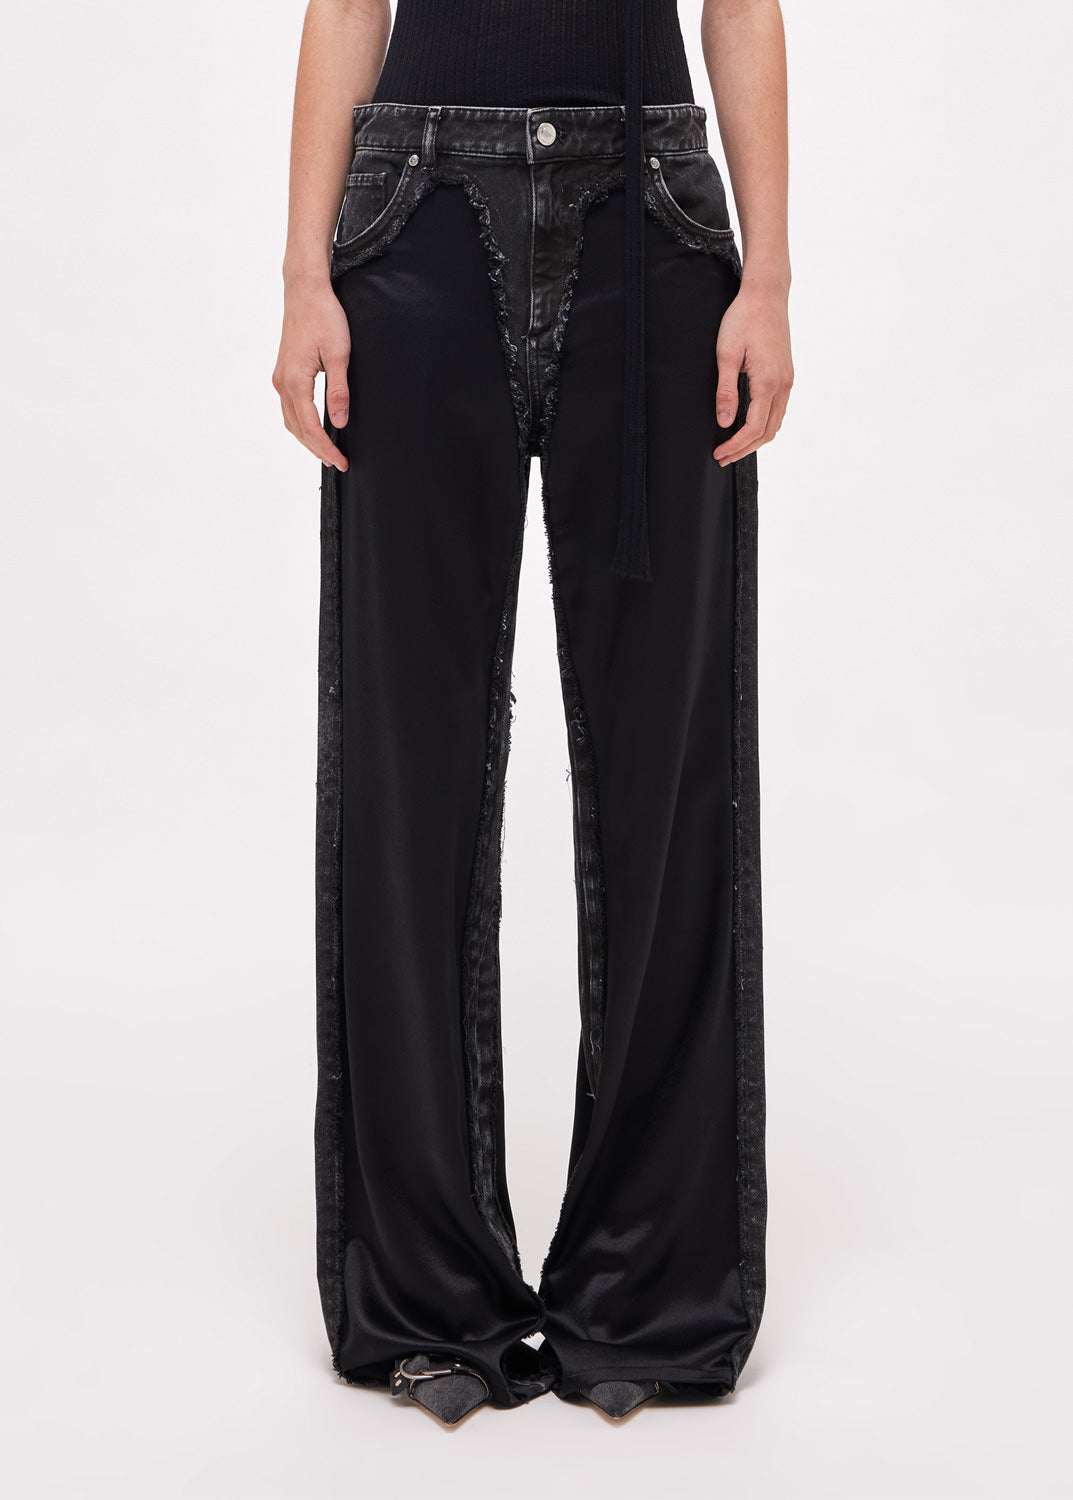 Satin Pants With Jean Inserts